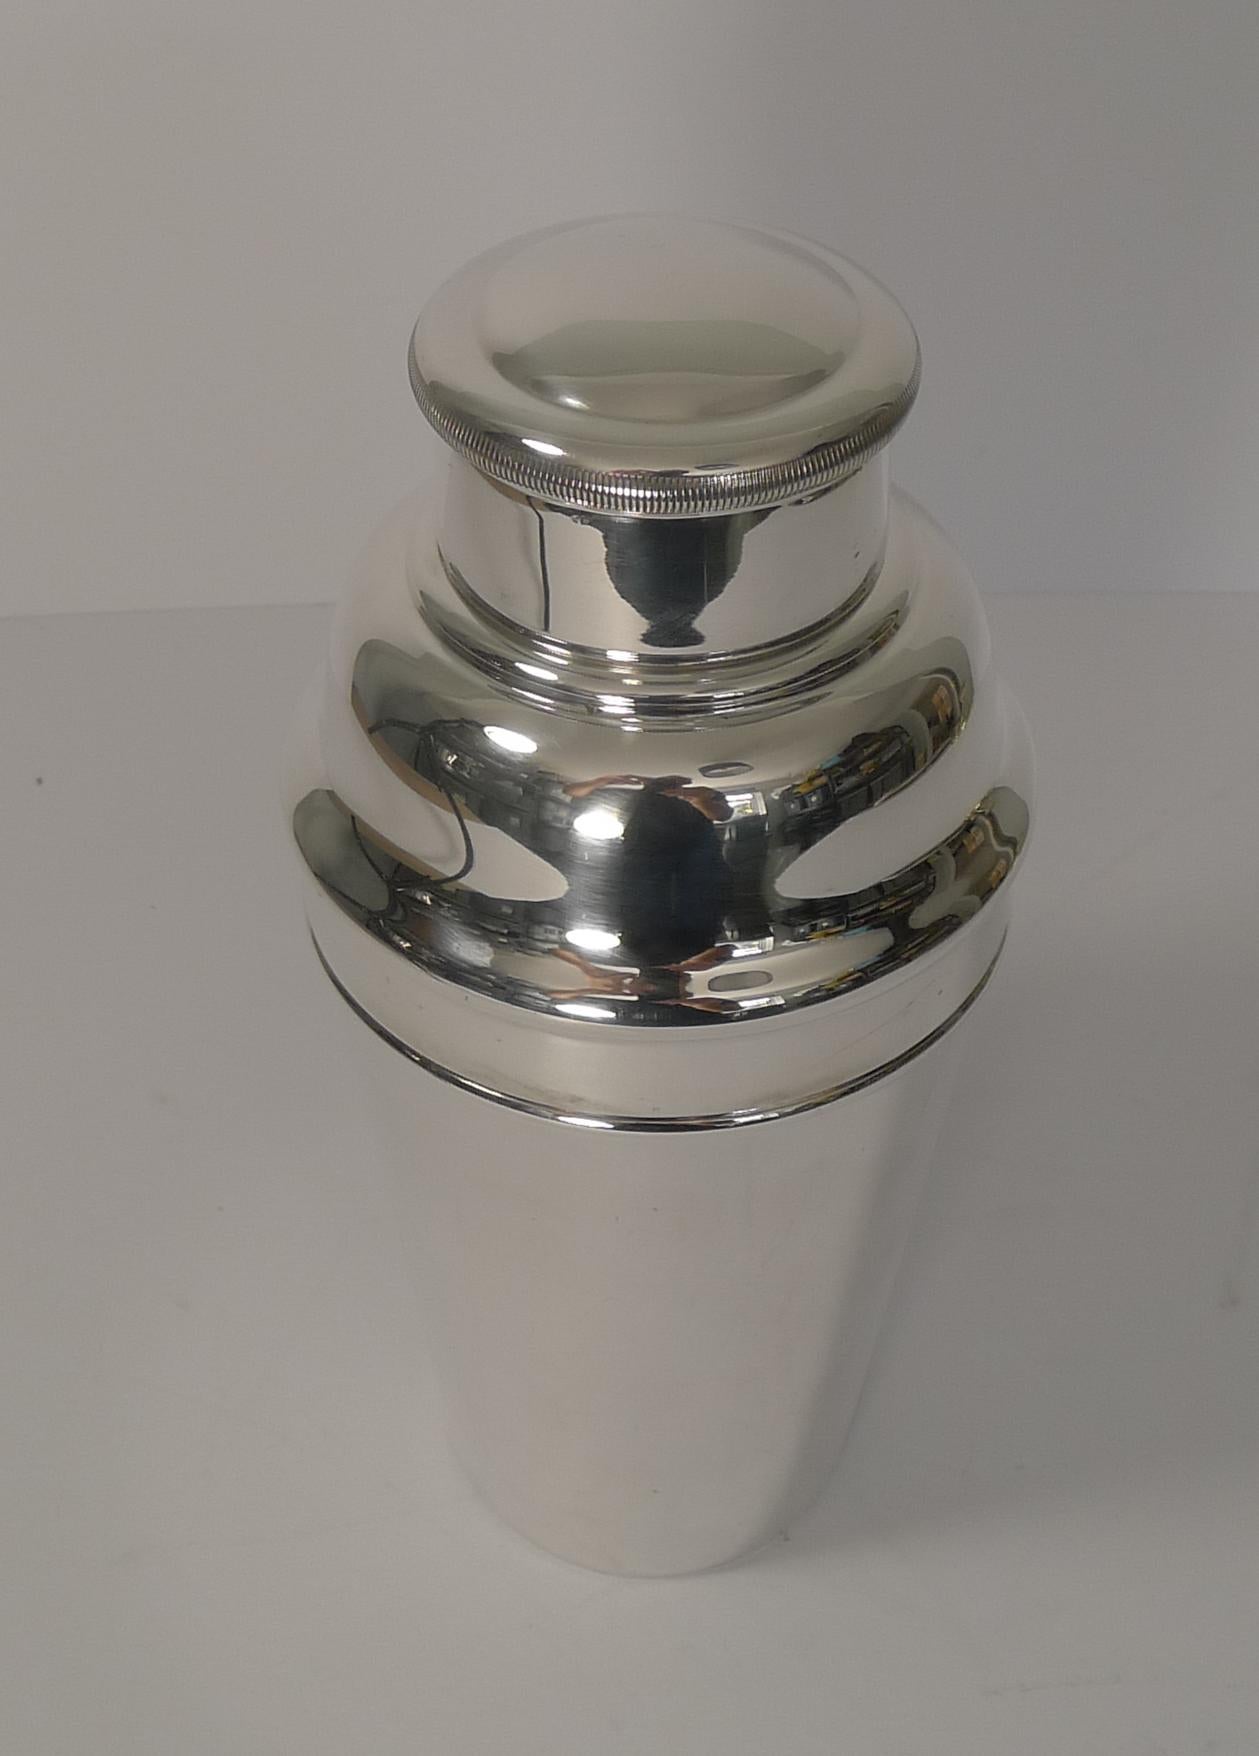 English Large 1 1/2 Pint Art Deco Cocktail Shaker by William Suckling, circa 1930